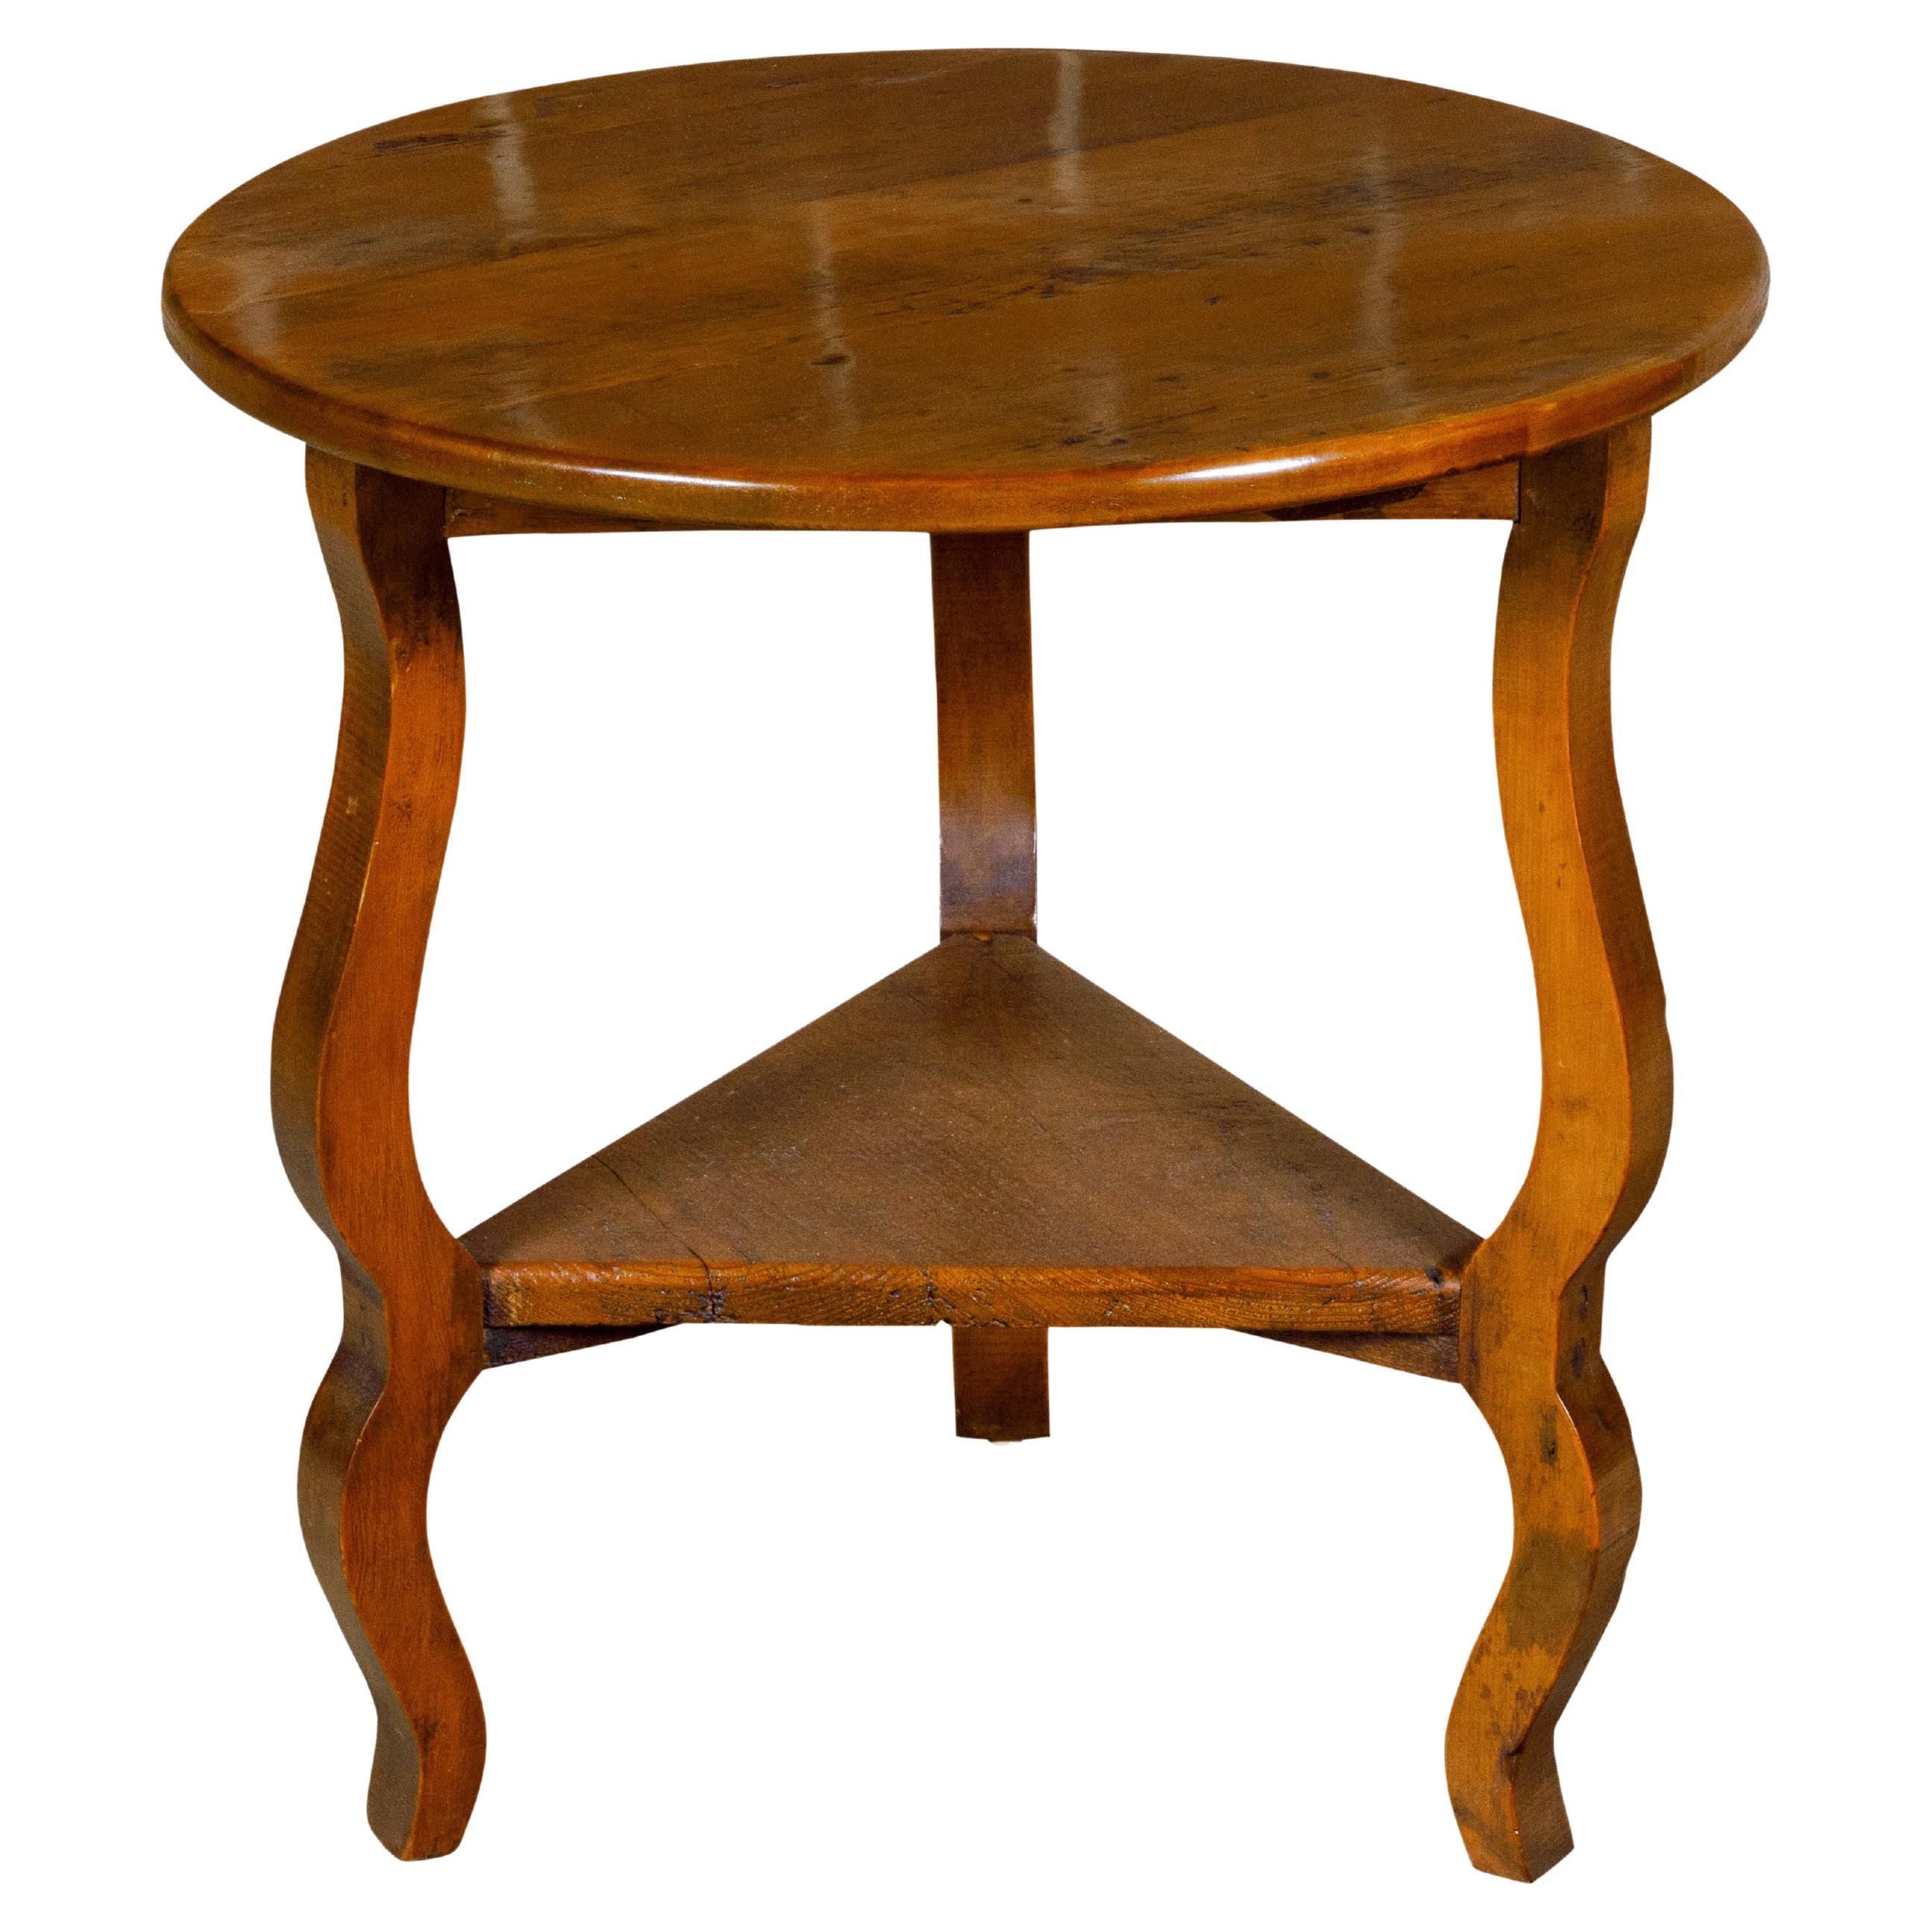 English Pine Side Table with Circular Top, Curving Legs and Triangular Shelf